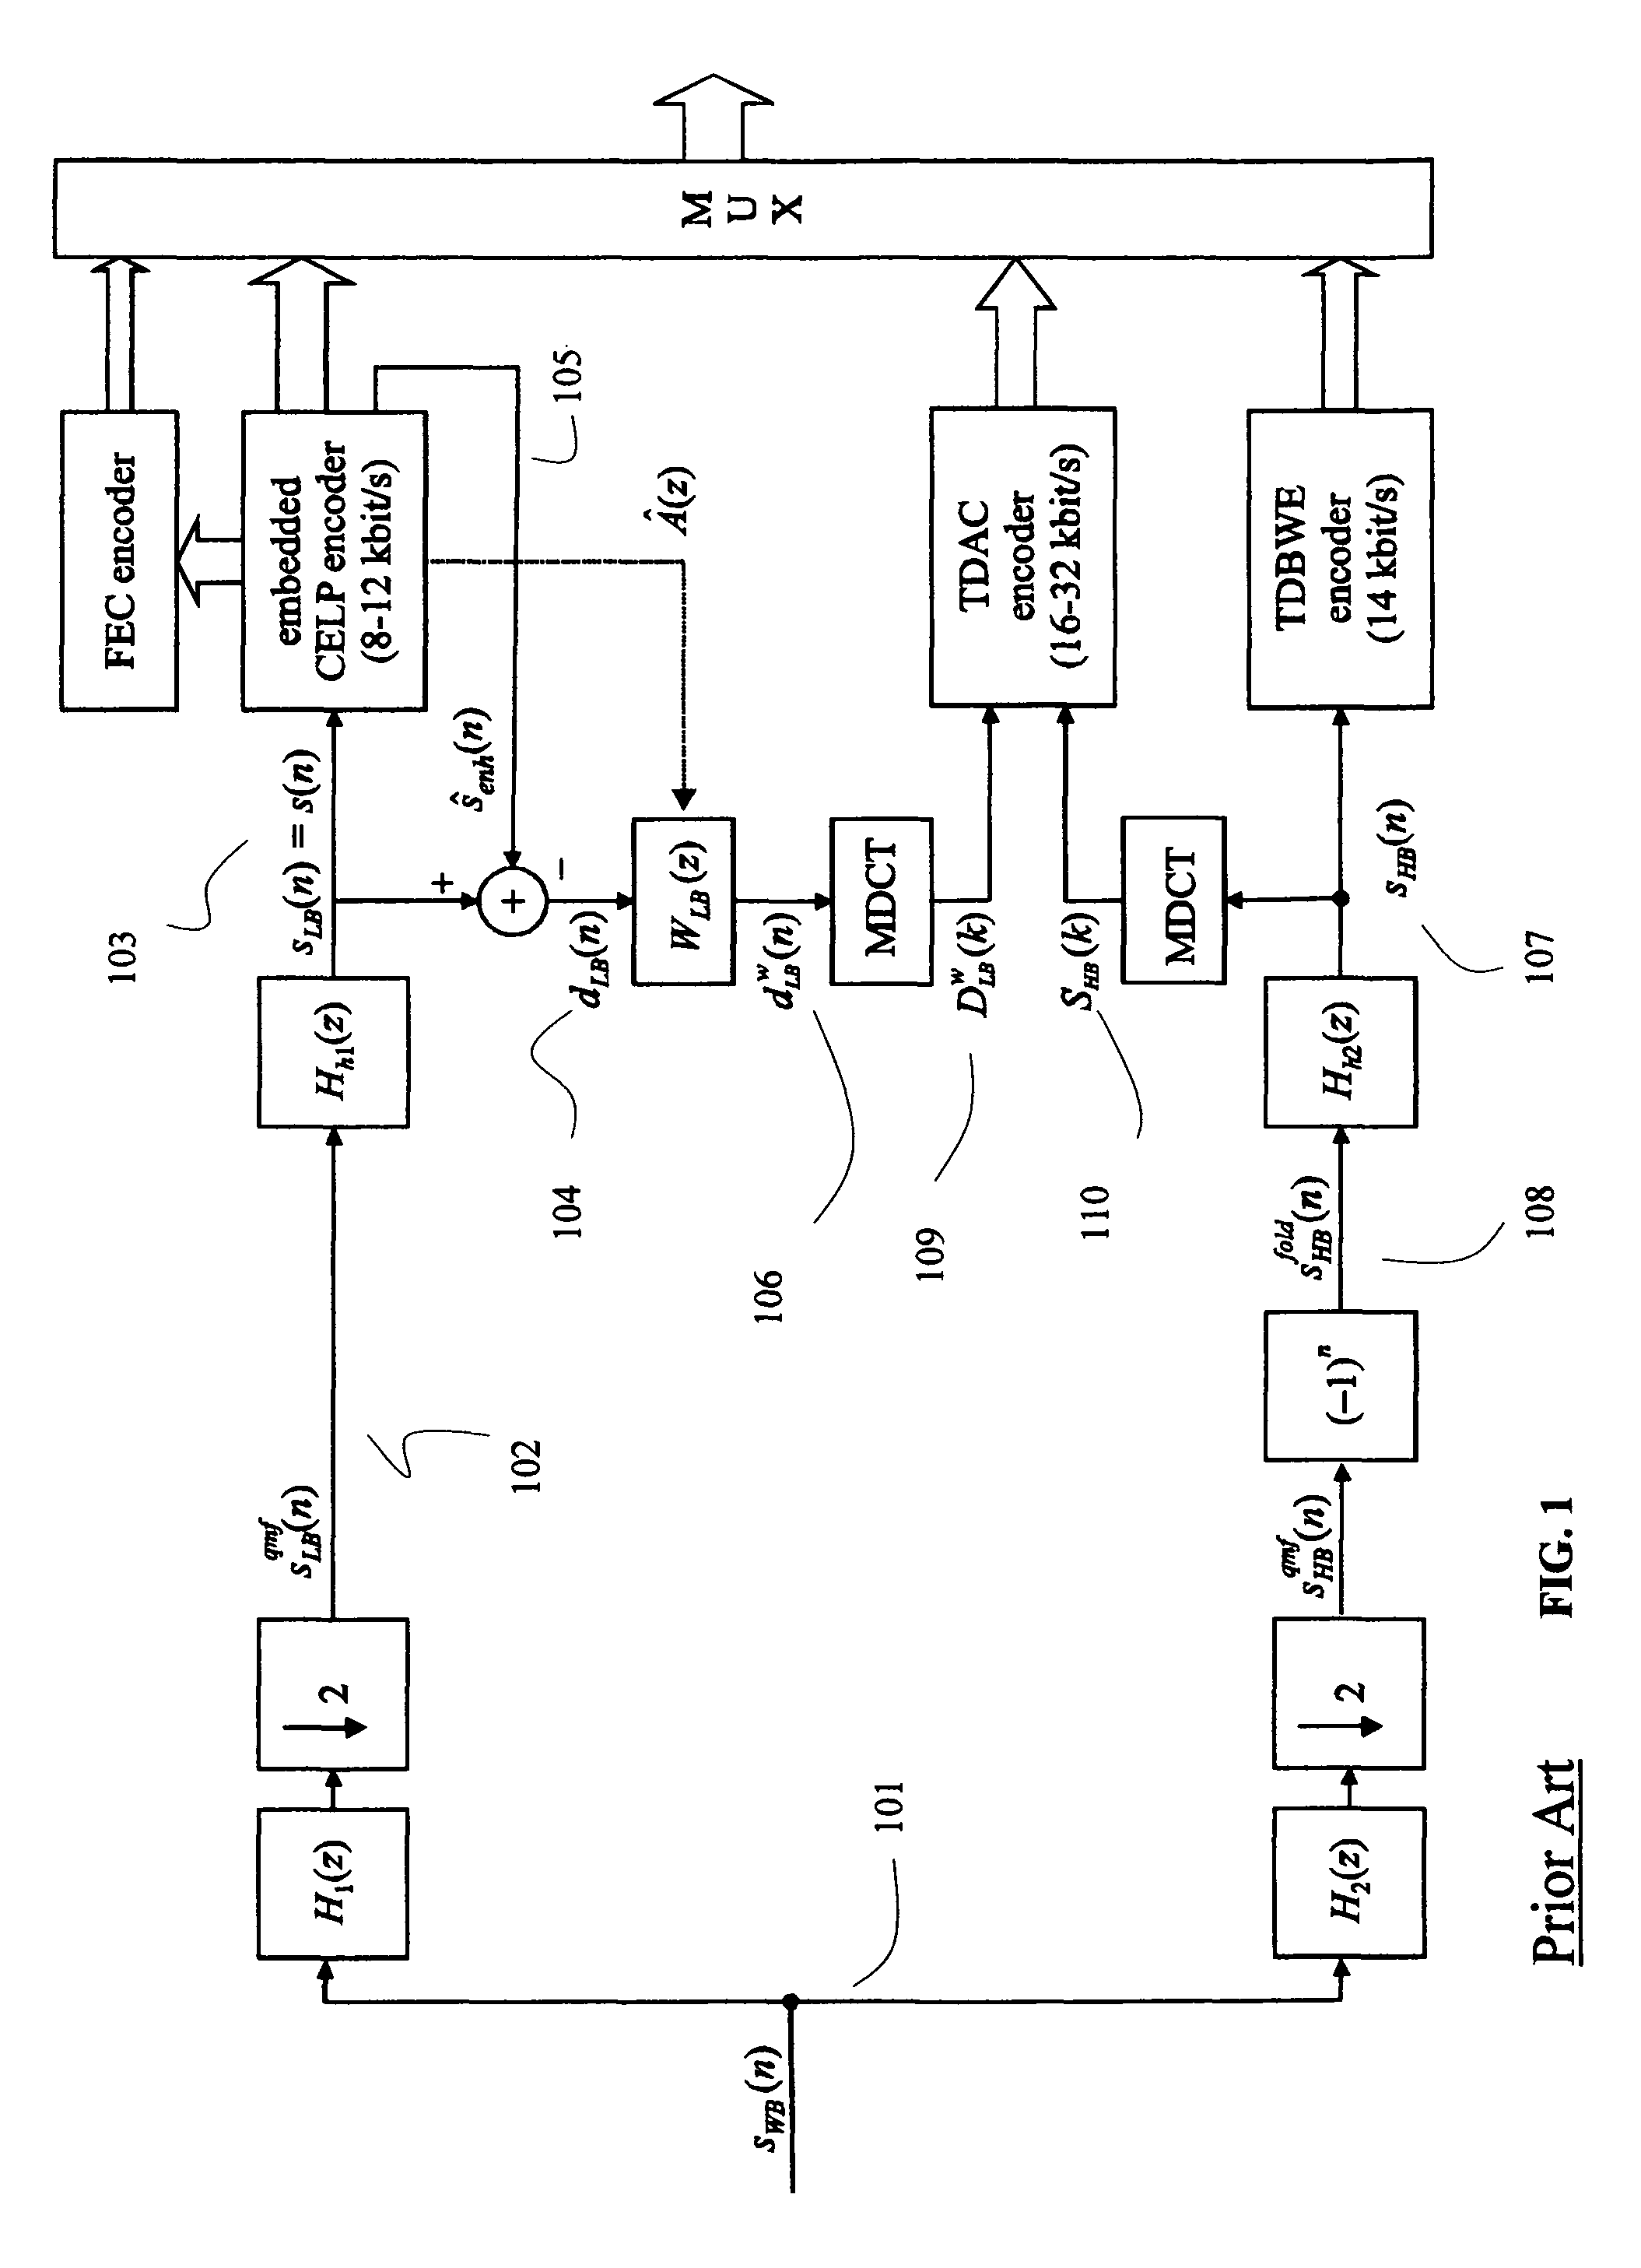 Method for classifying audio signal into fast signal or slow signal